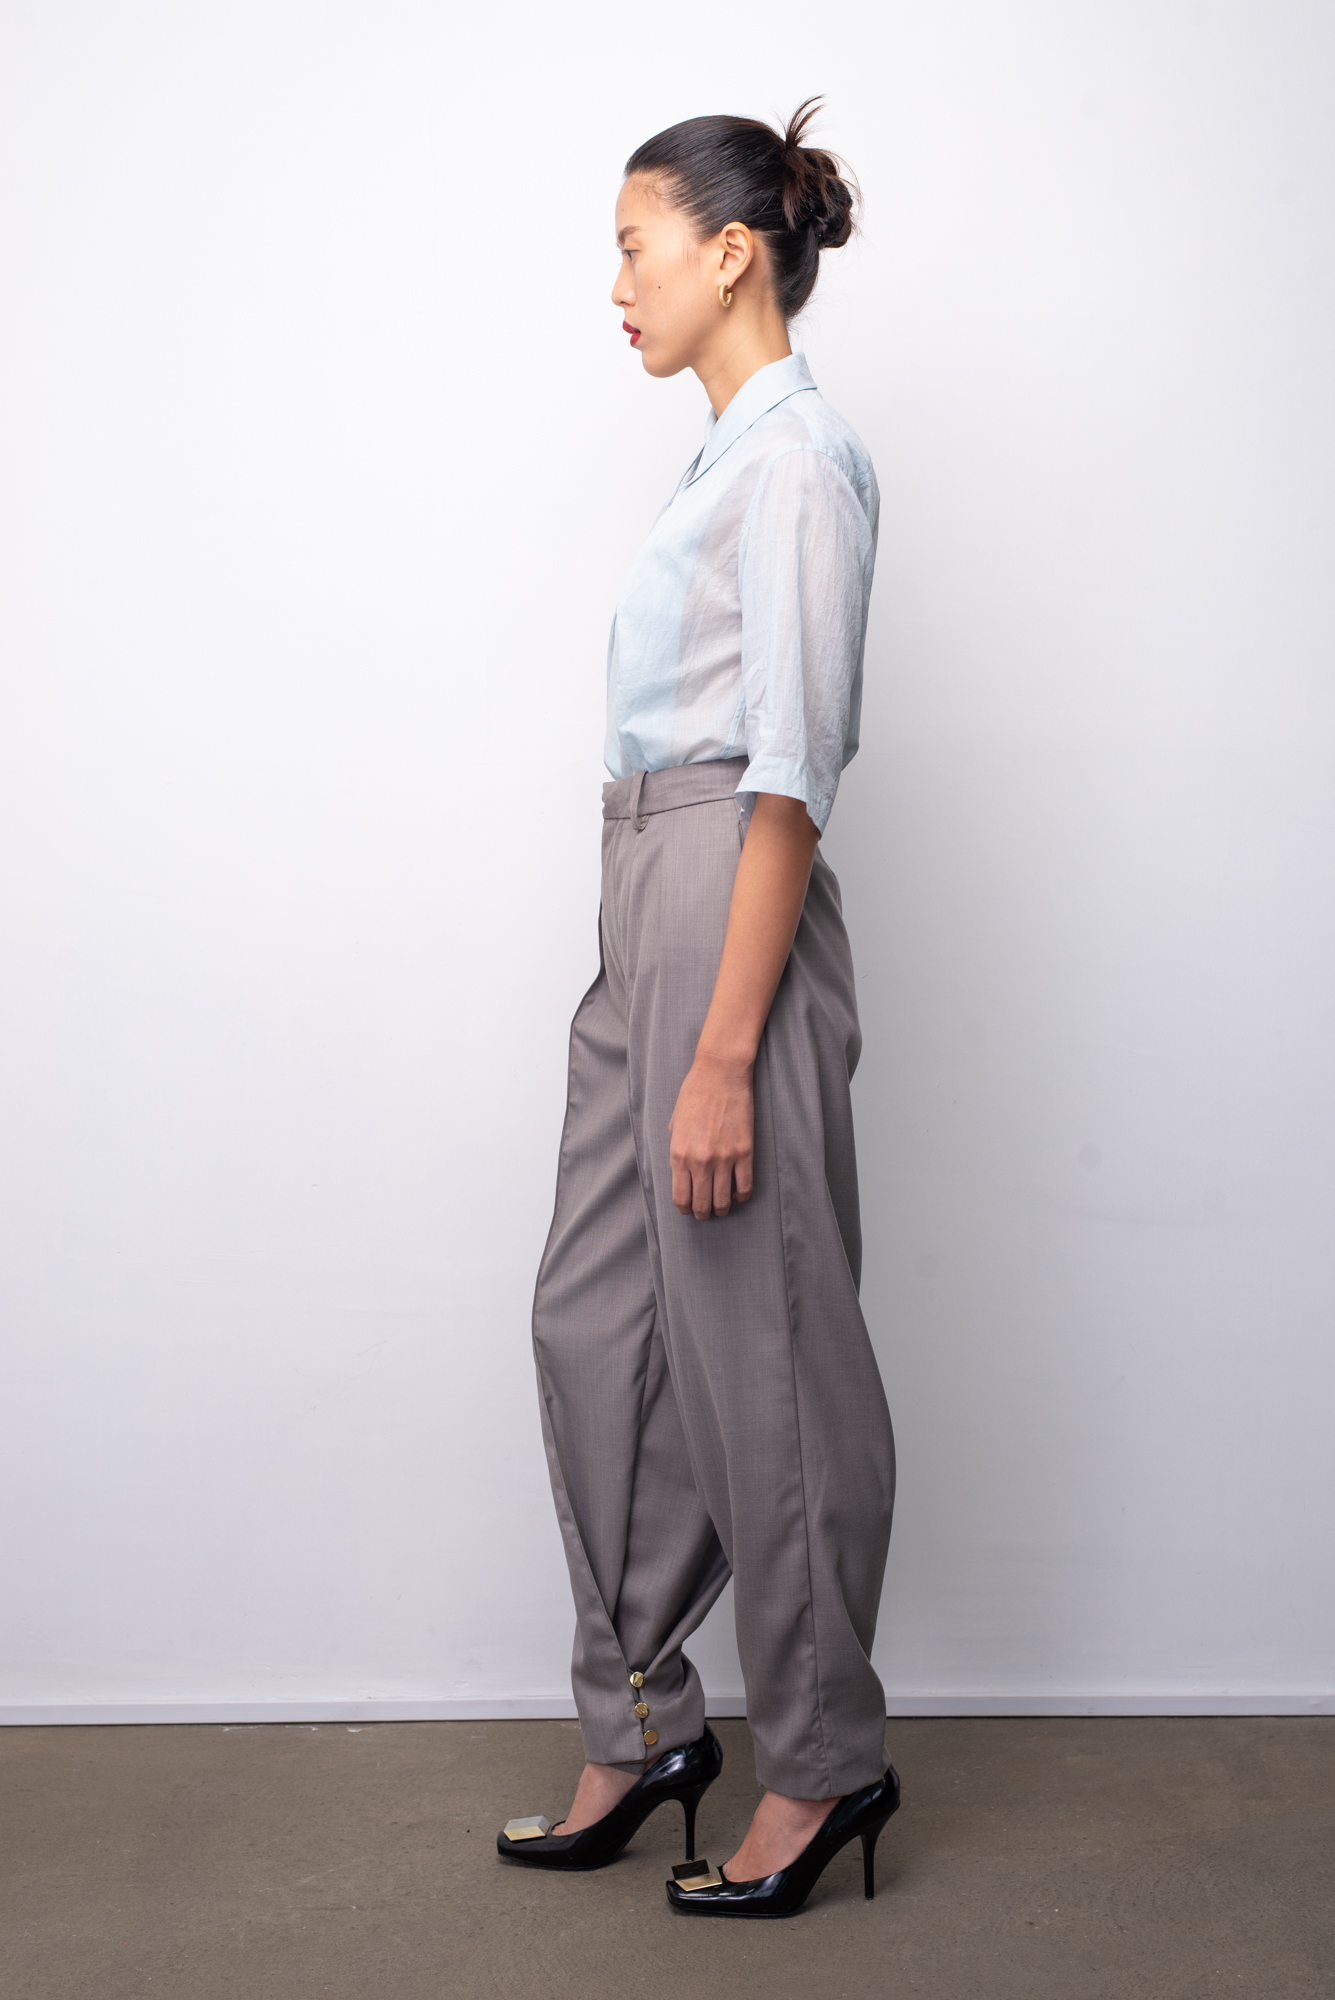 Charlie High-waisted Tailored Trousers (Charcoal) - PENNYYPINCHER